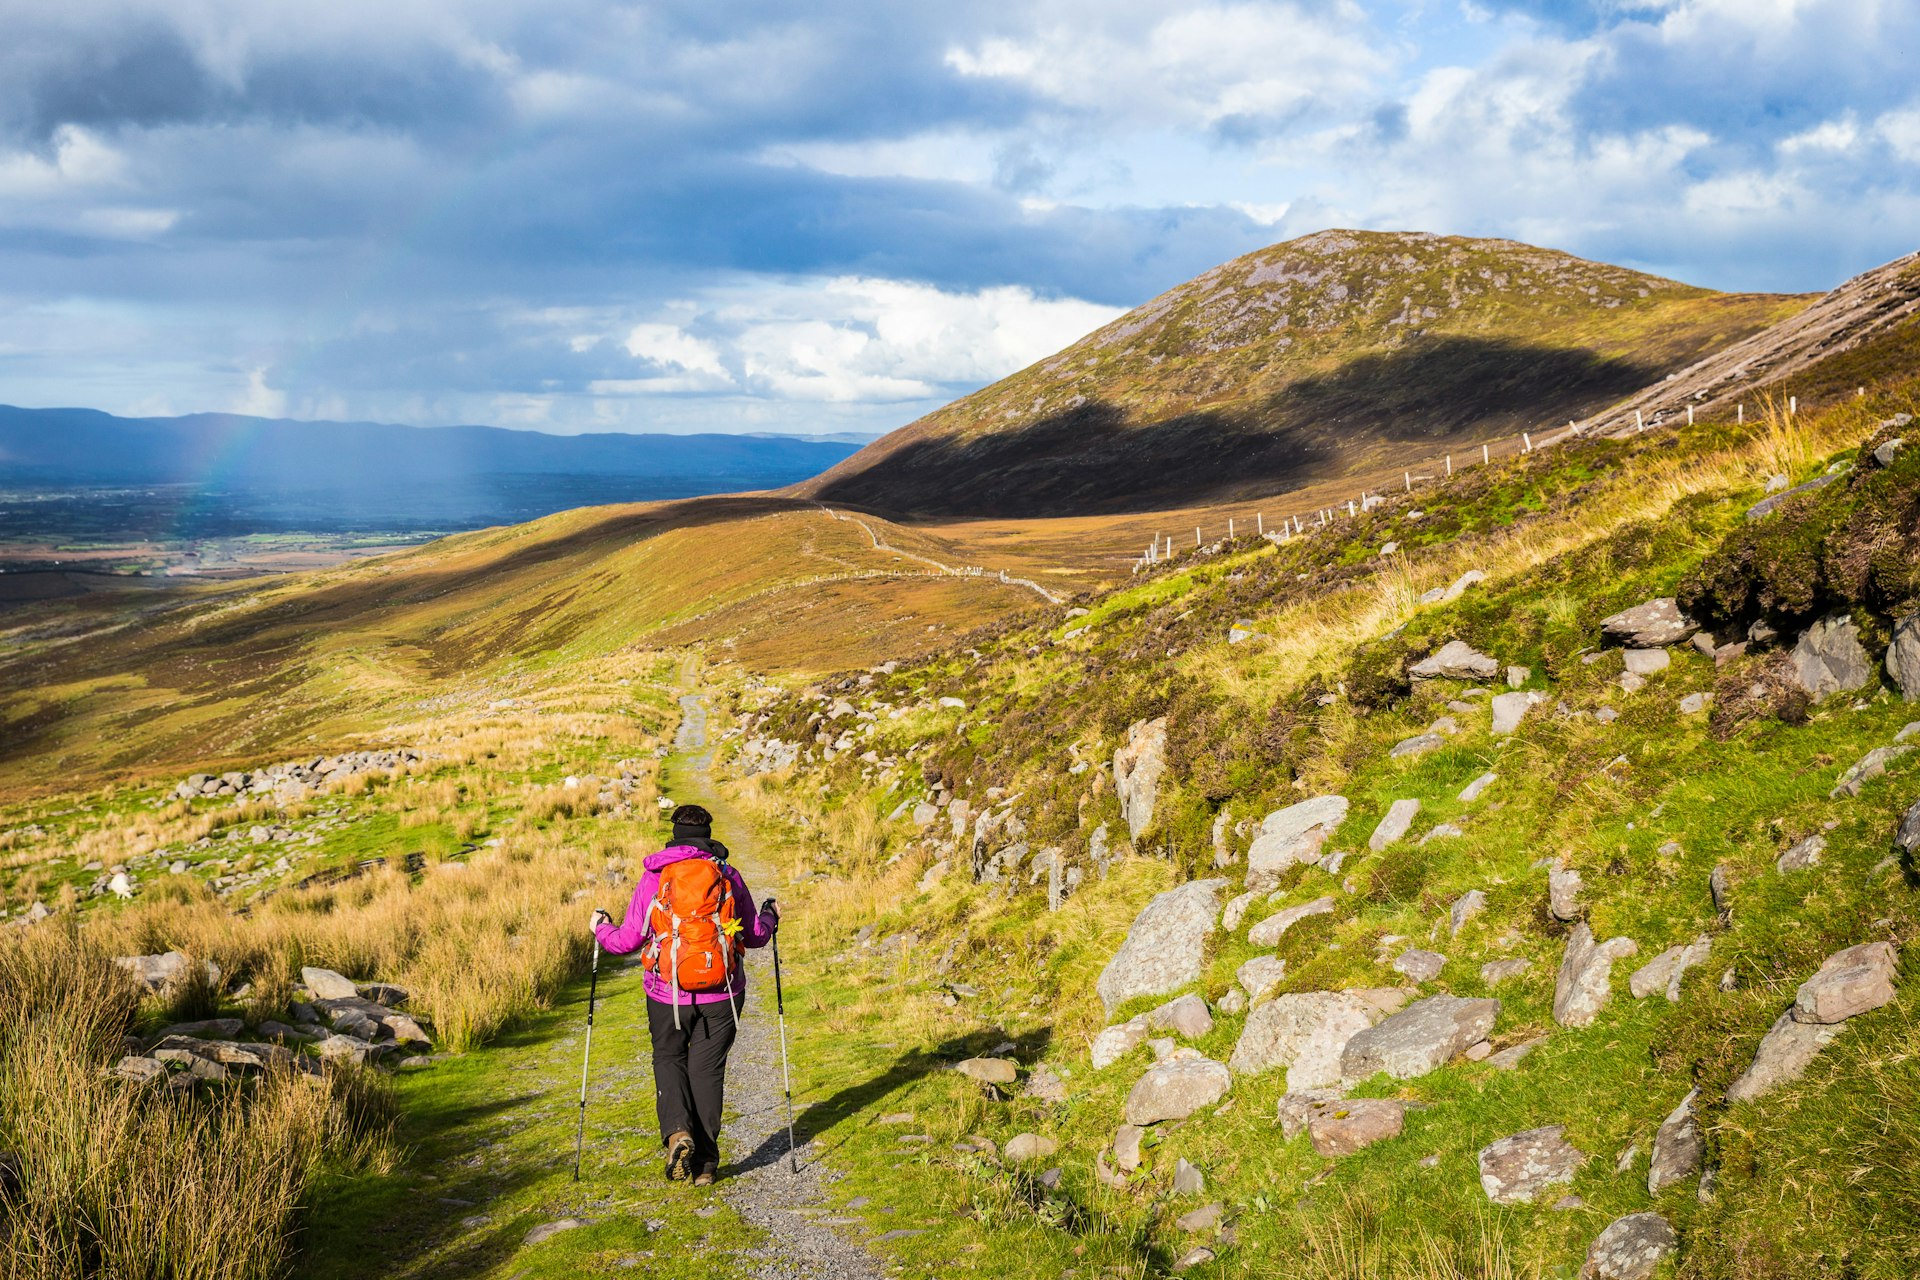 A hiker with a backpack and hiking poles follows a trail through a mountainous region of Ireland